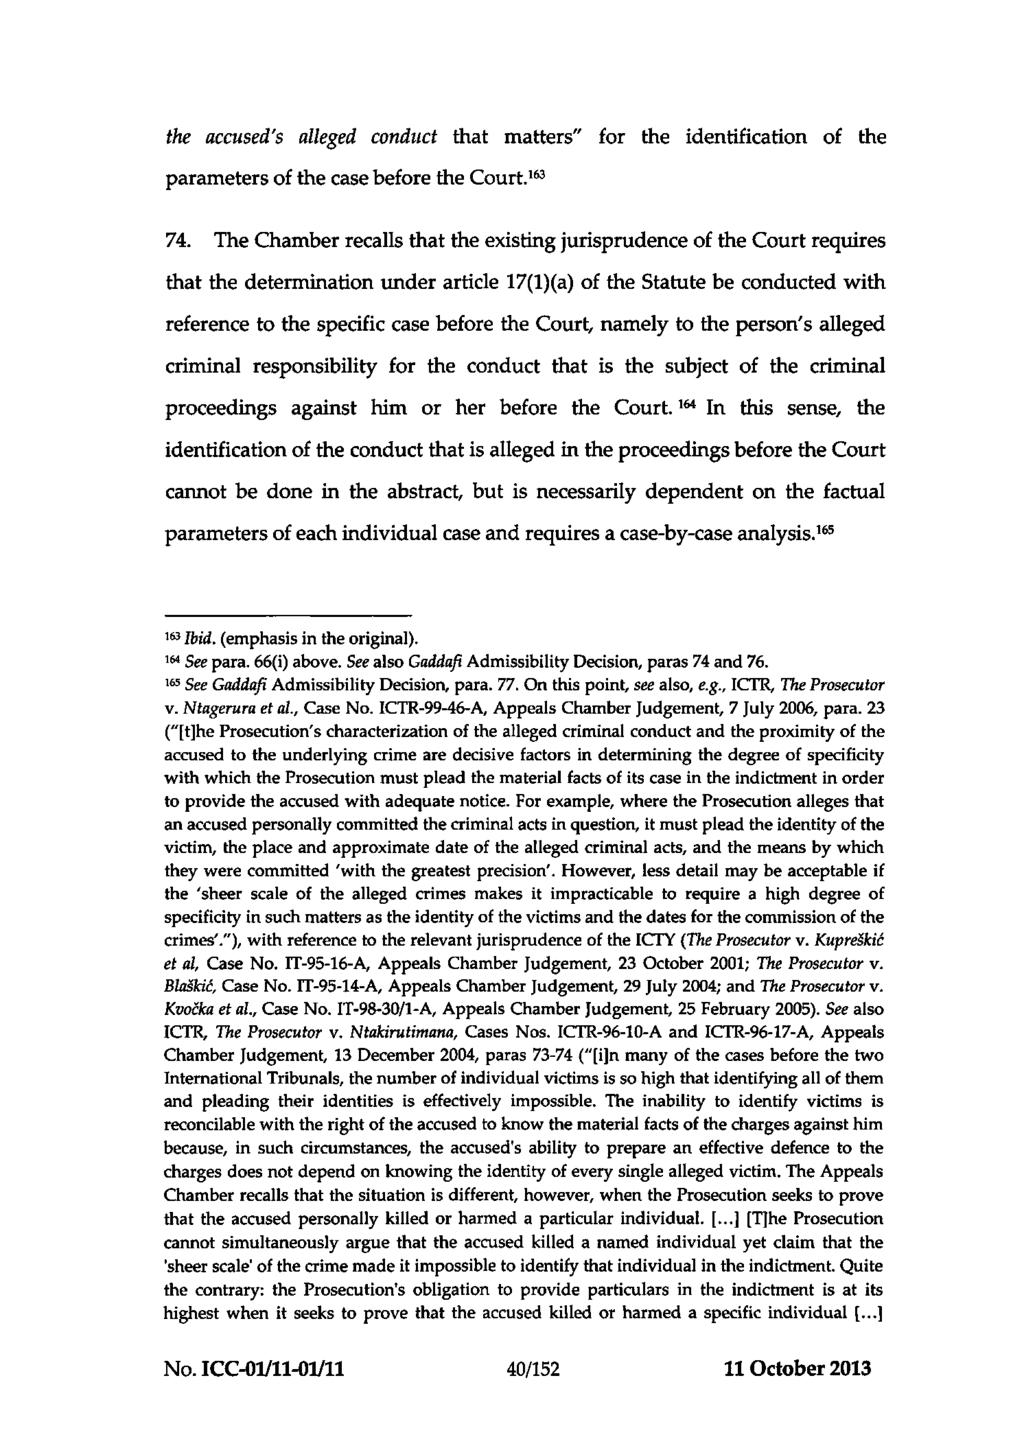 ICC-01/11-01/11-466-Red 11-10-2013 40/152 NM PT the accused's alleged conduct that matters" for the identification of the parameters of the case before the Court.^^^ 74.